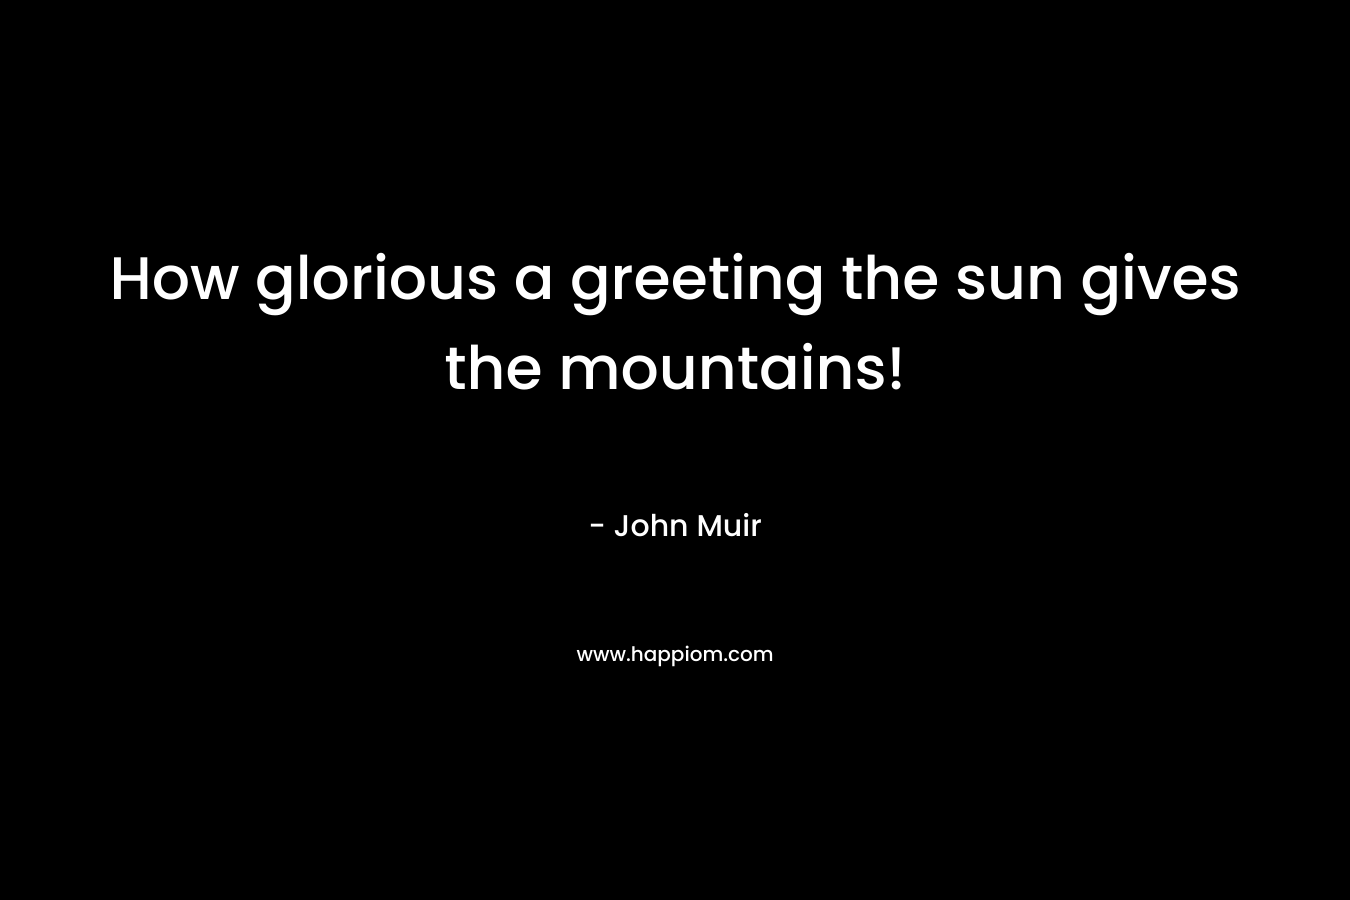 How glorious a greeting the sun gives the mountains!